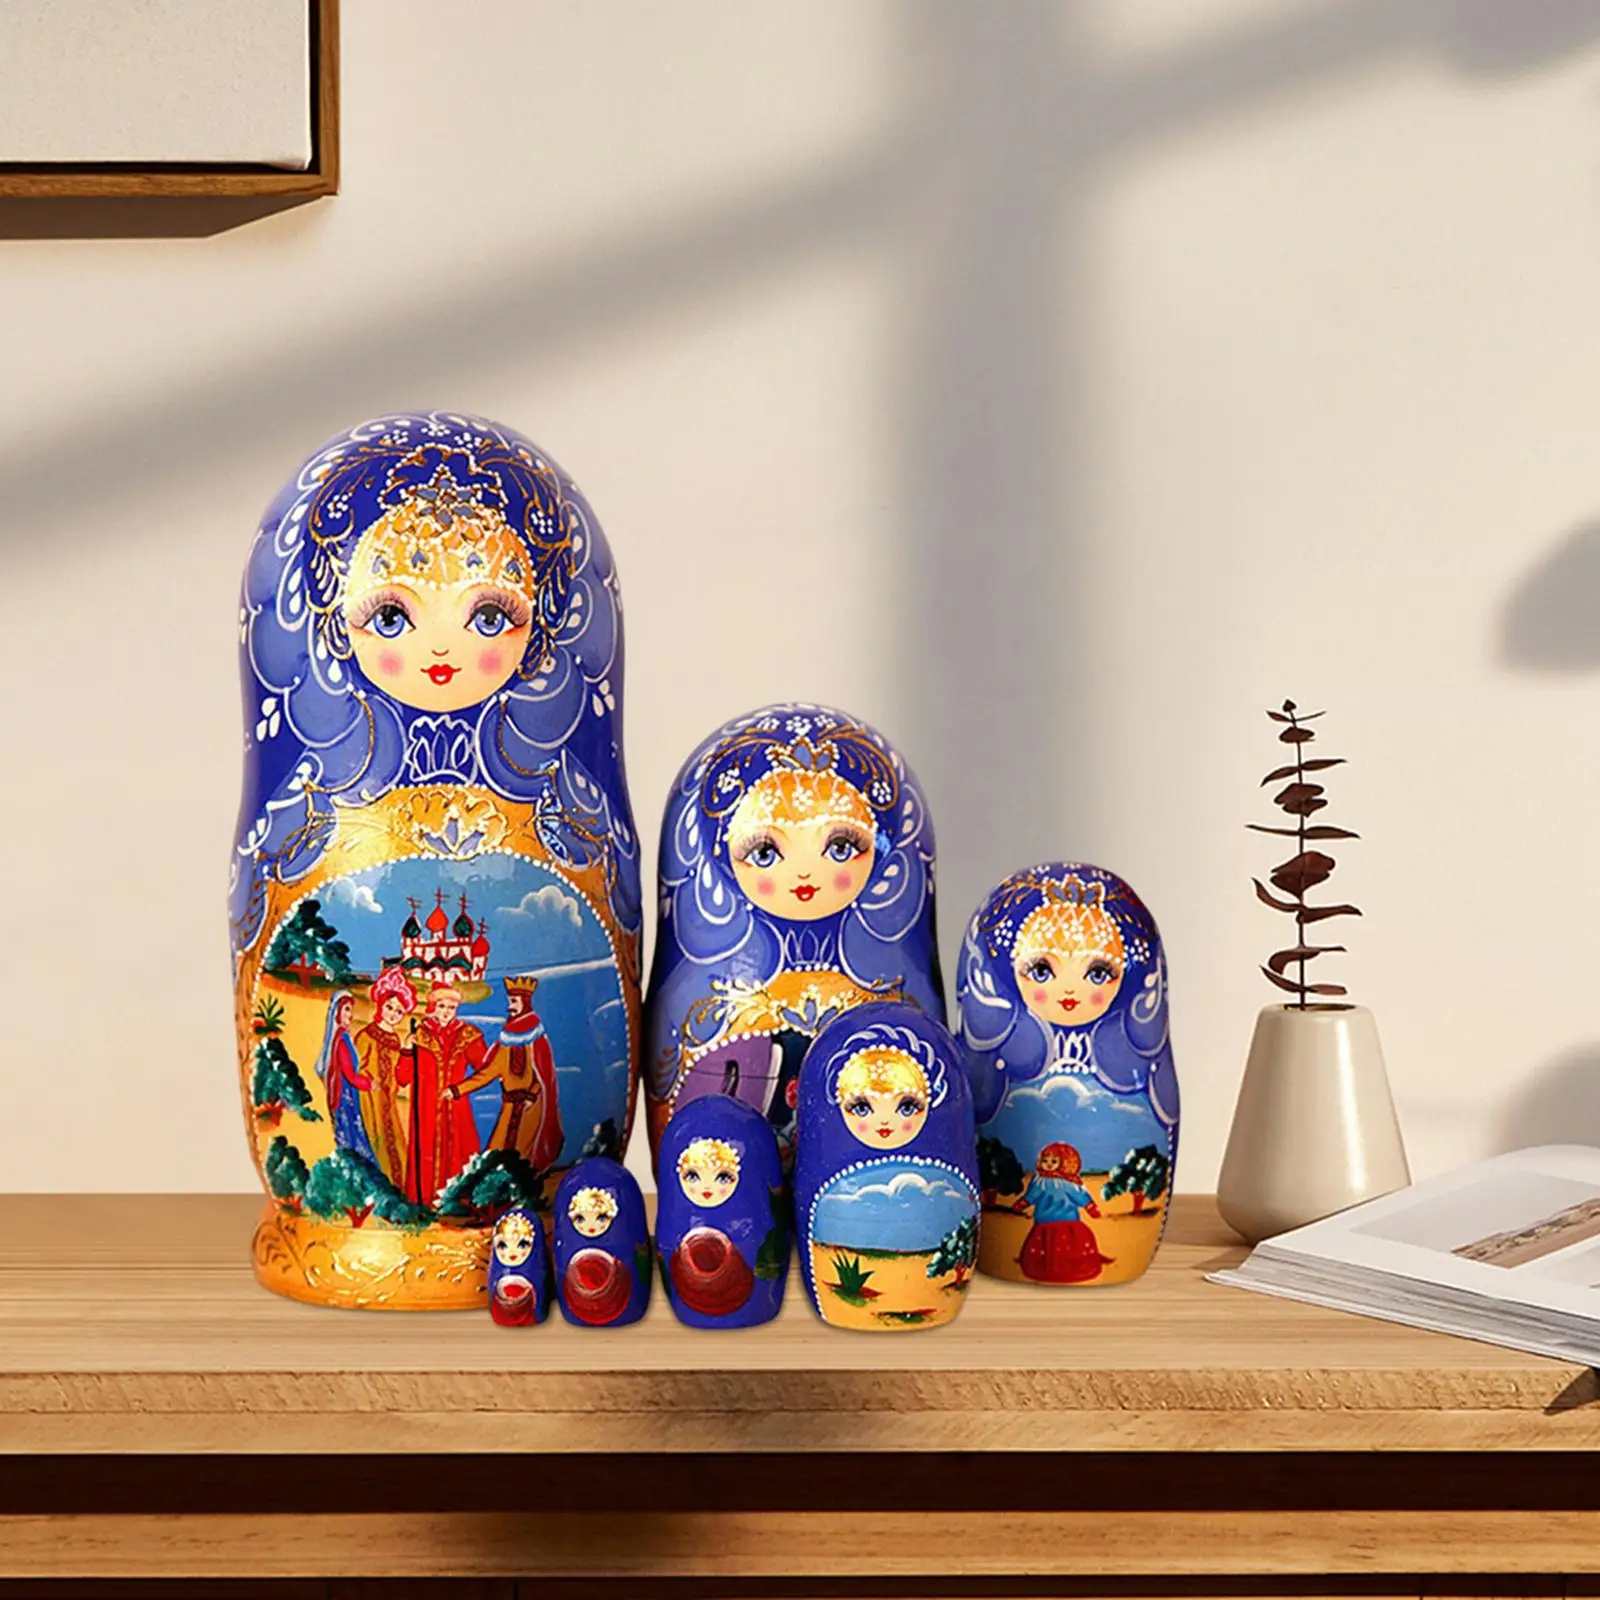 7 Pieces Hand Painted Nesting Doll Matryoshka Doll Wood Russian Nesting Doll Stacking Dolls for Home Decoration Office Room Gift